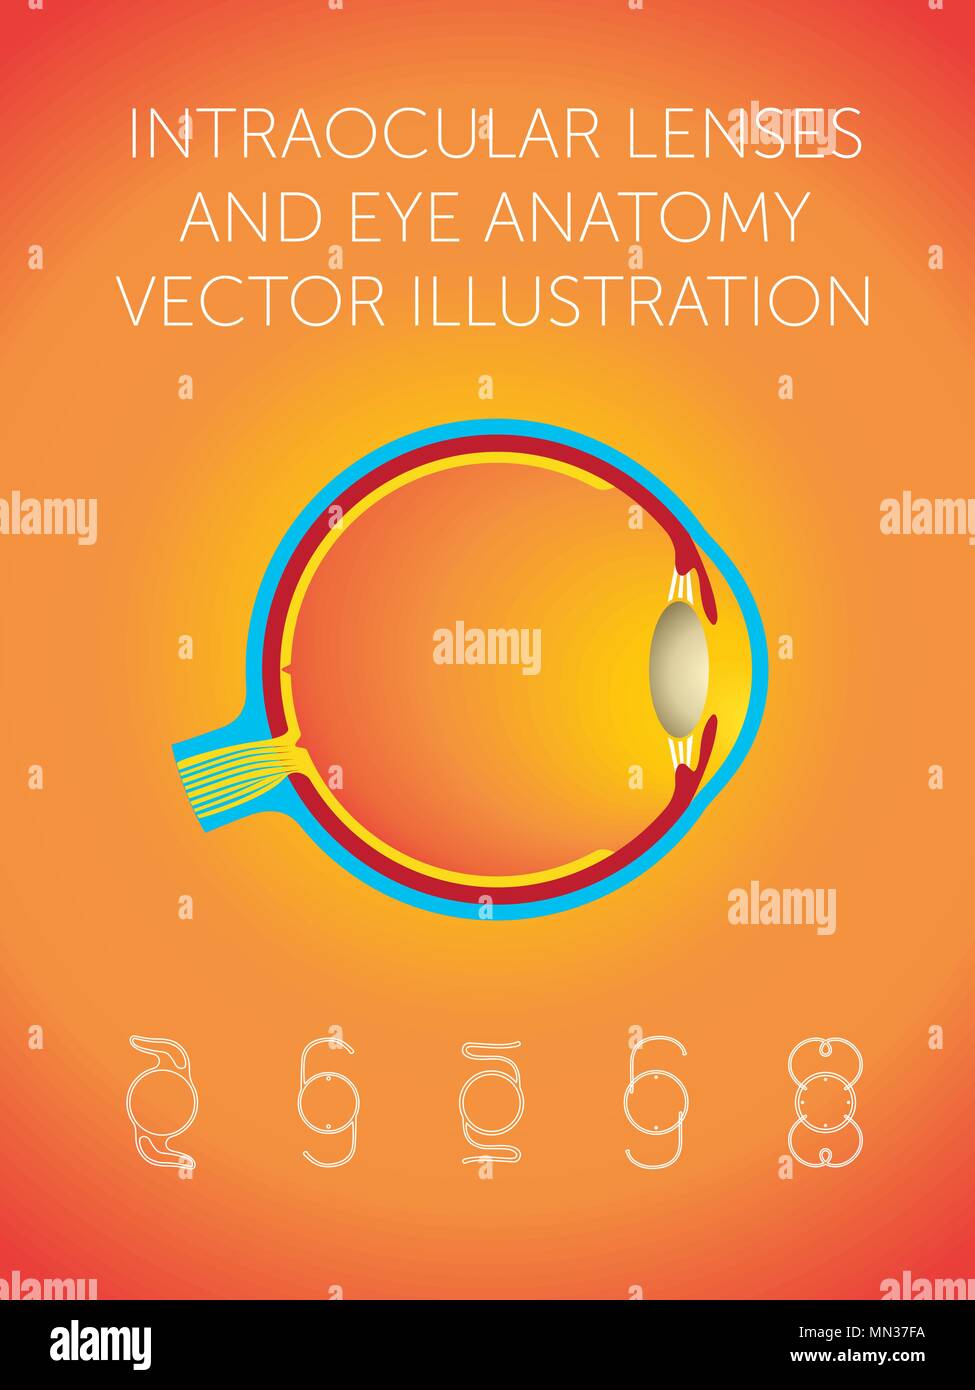 Schematic structure of eye and types of intraocular lenses on orange background Stock Vector